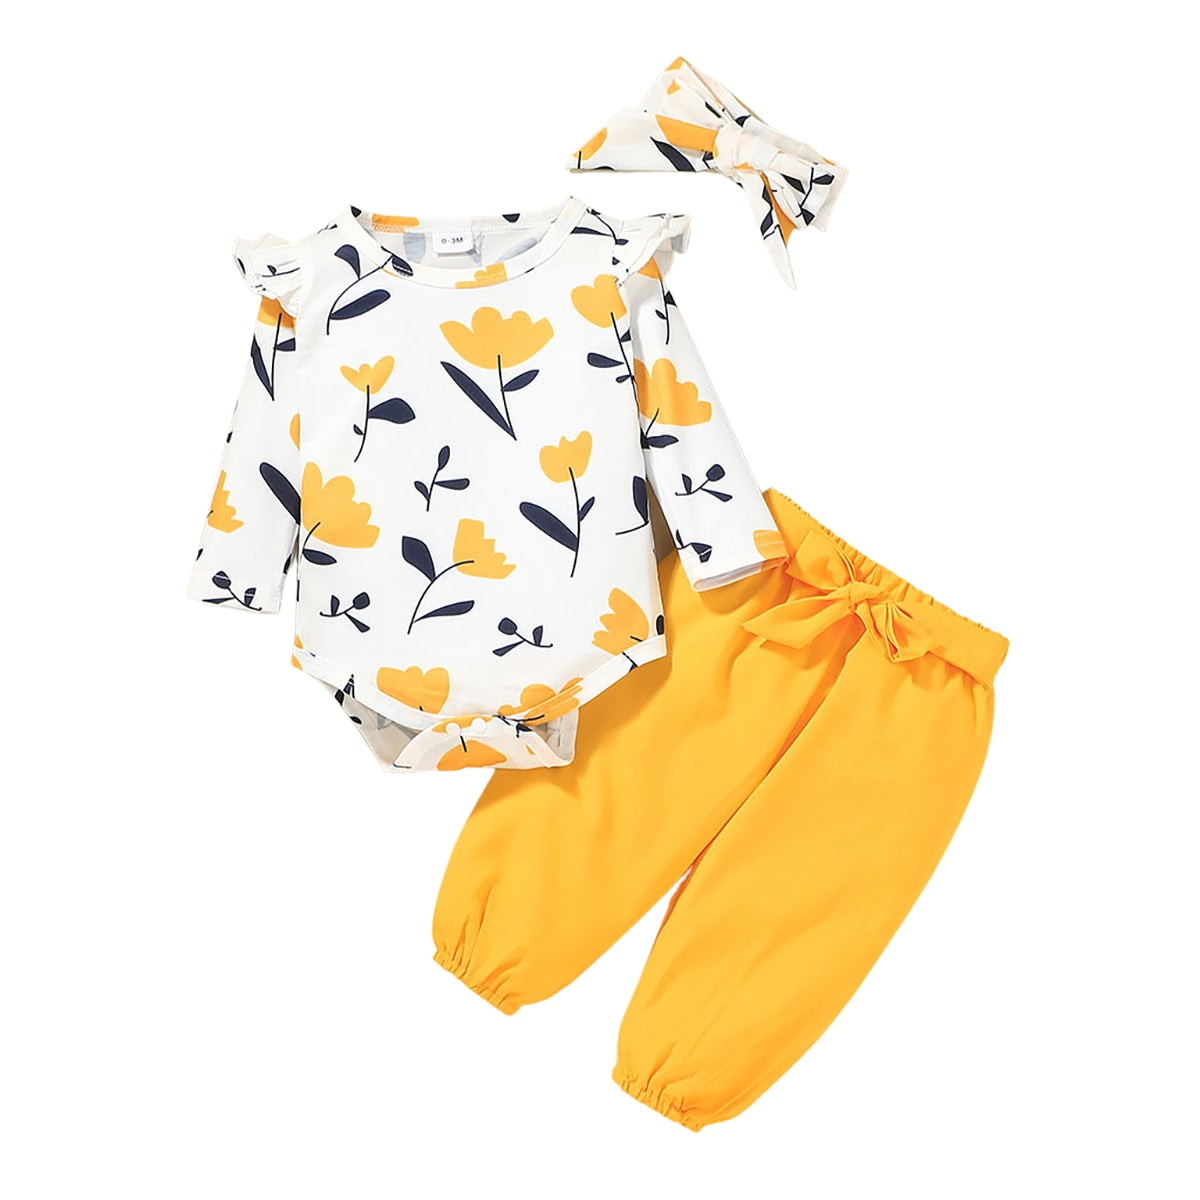 3Pcs Set Infant Toddler Printed Long Sleeve Romper + Trousers +Bandana Newborn Baby Clothes for Girl Cotton Casual Fashion